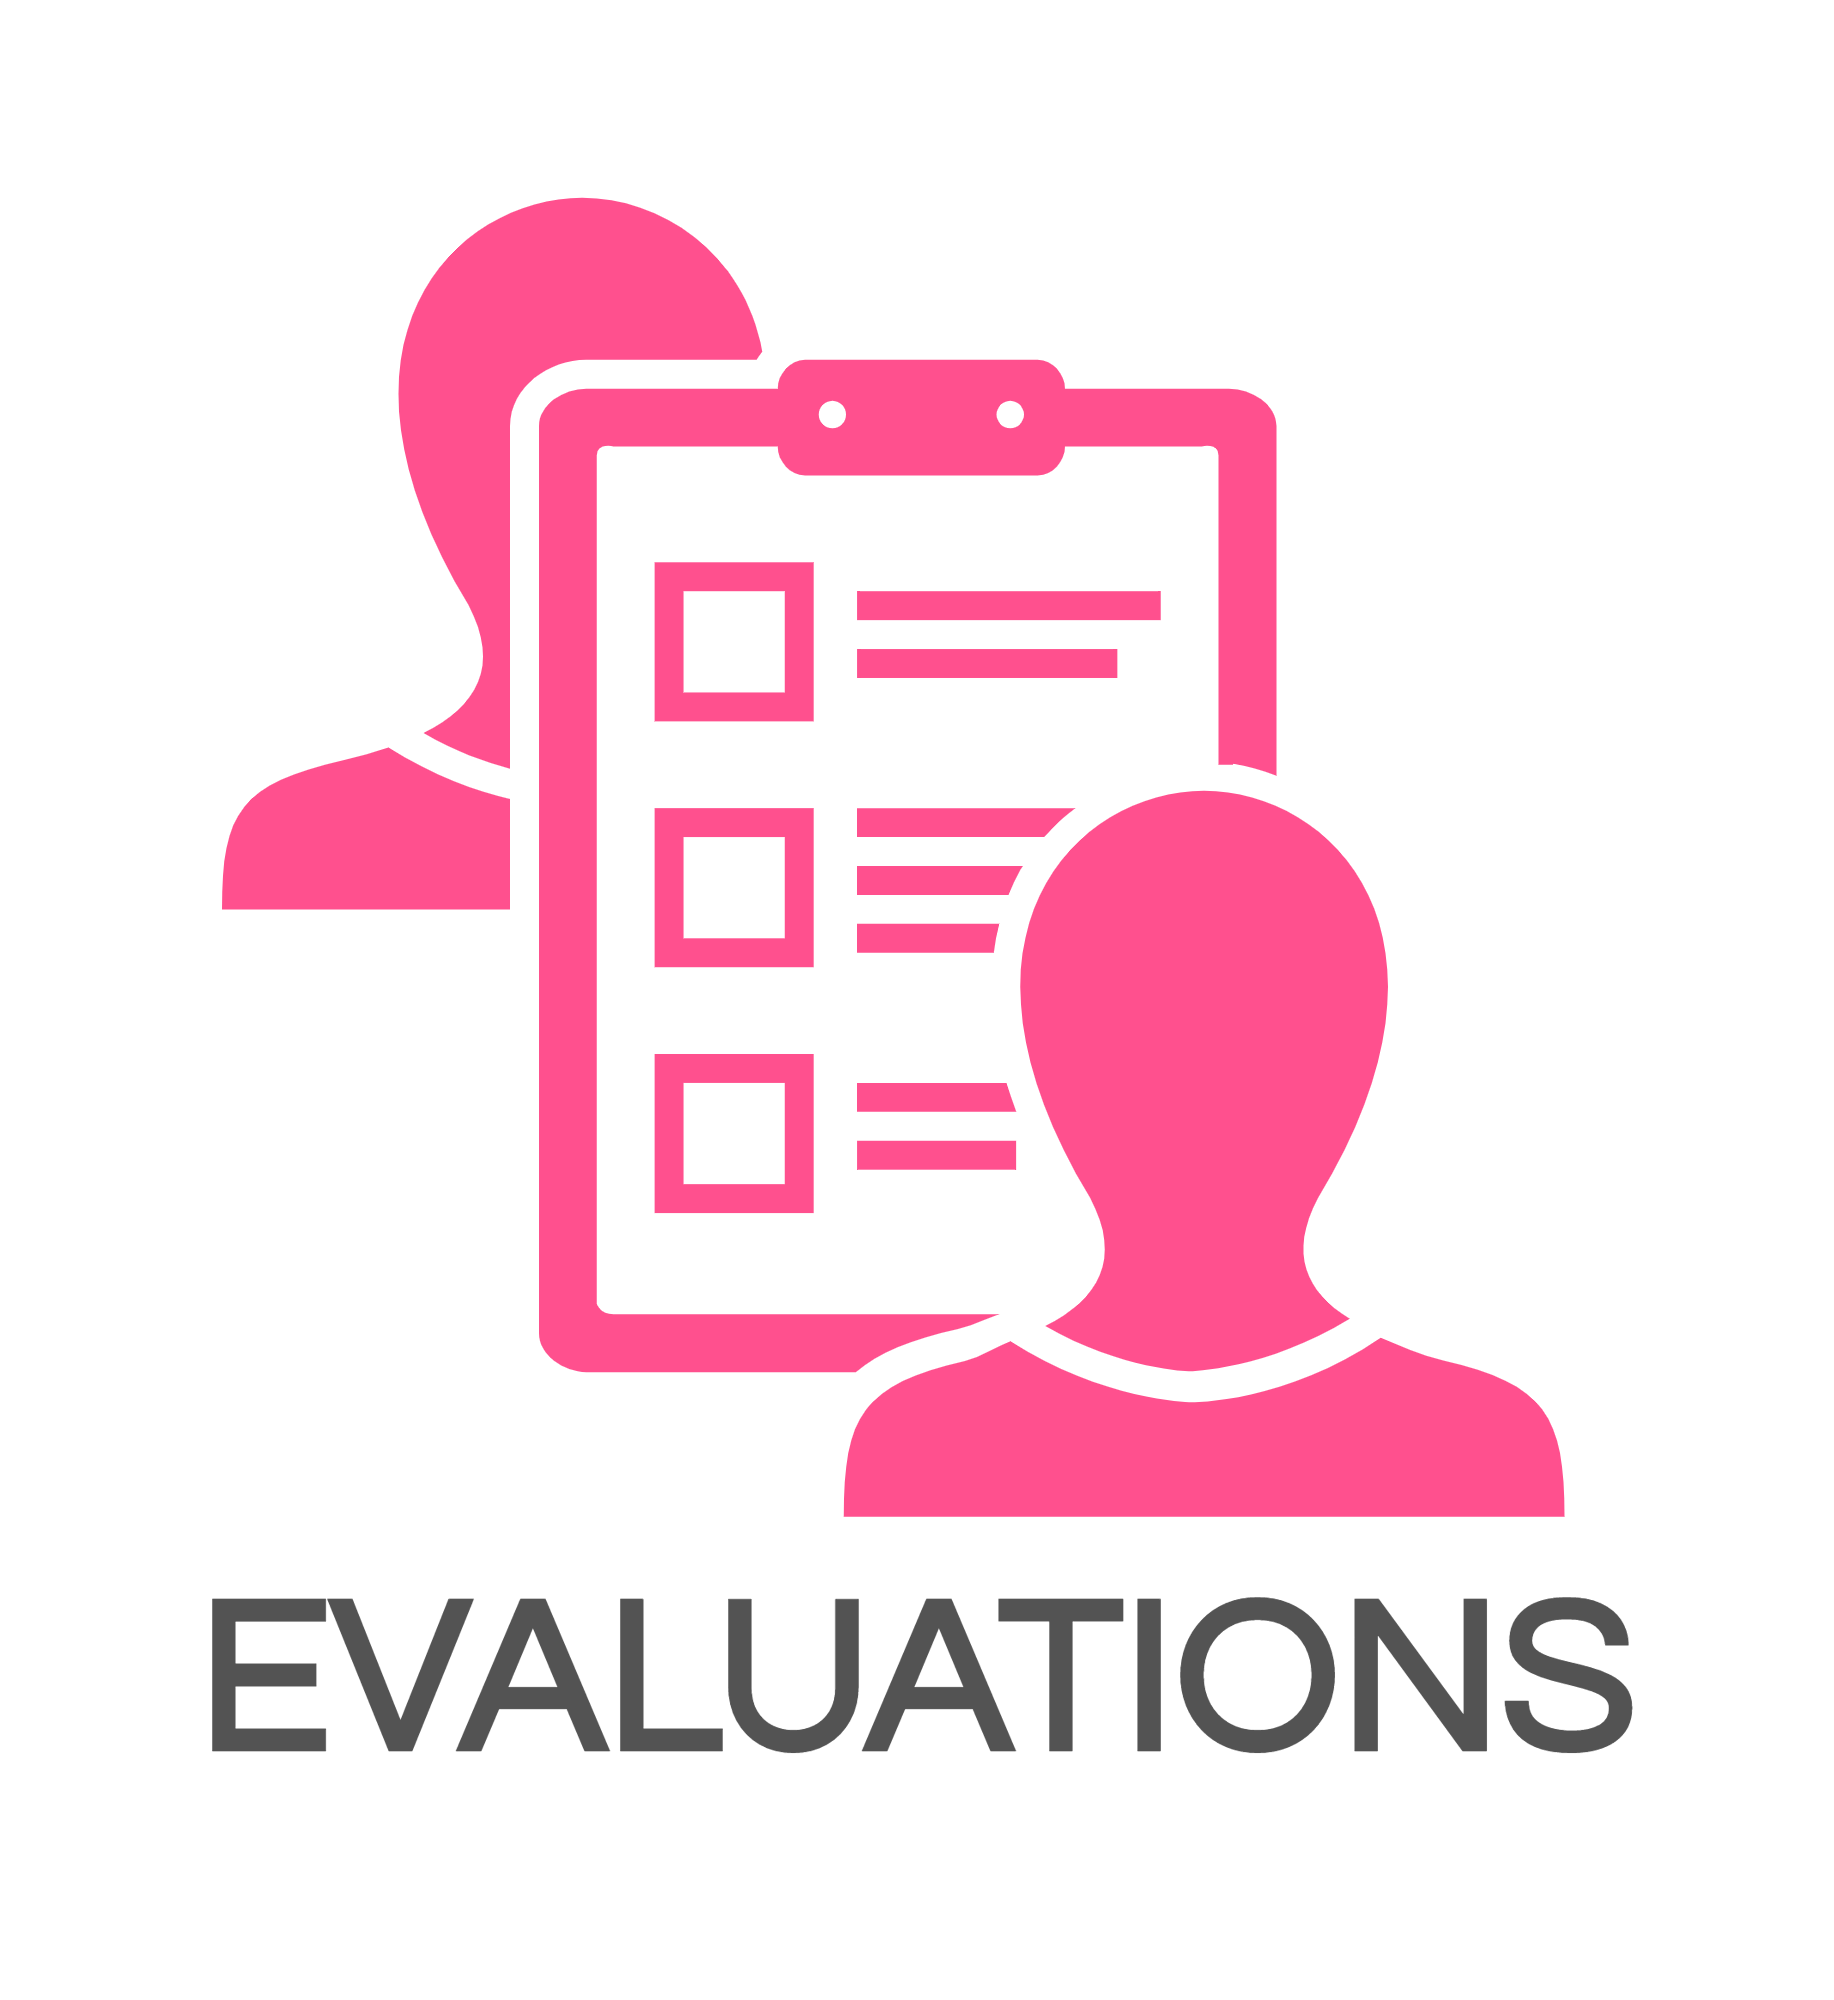 EVALUATIONS-logo.png